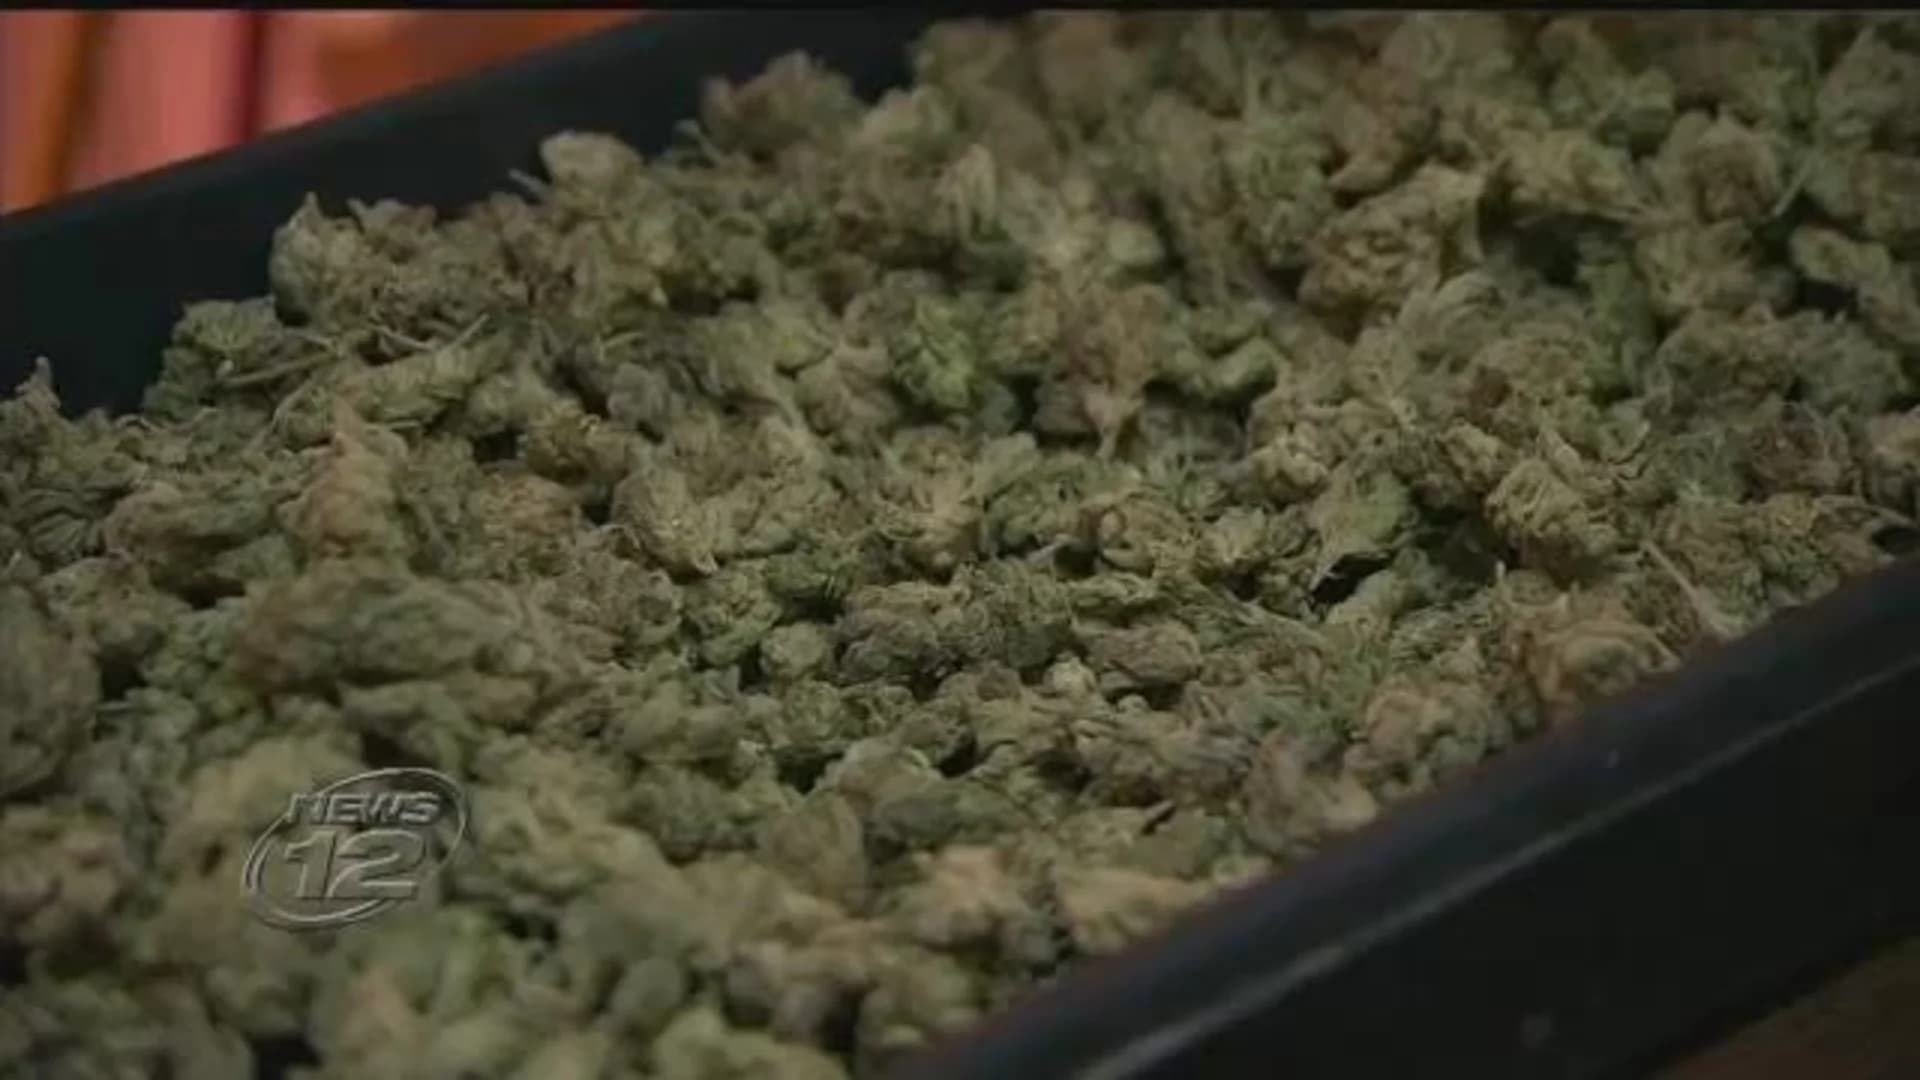 Nassau report doubles down on opting out of legal pot sales